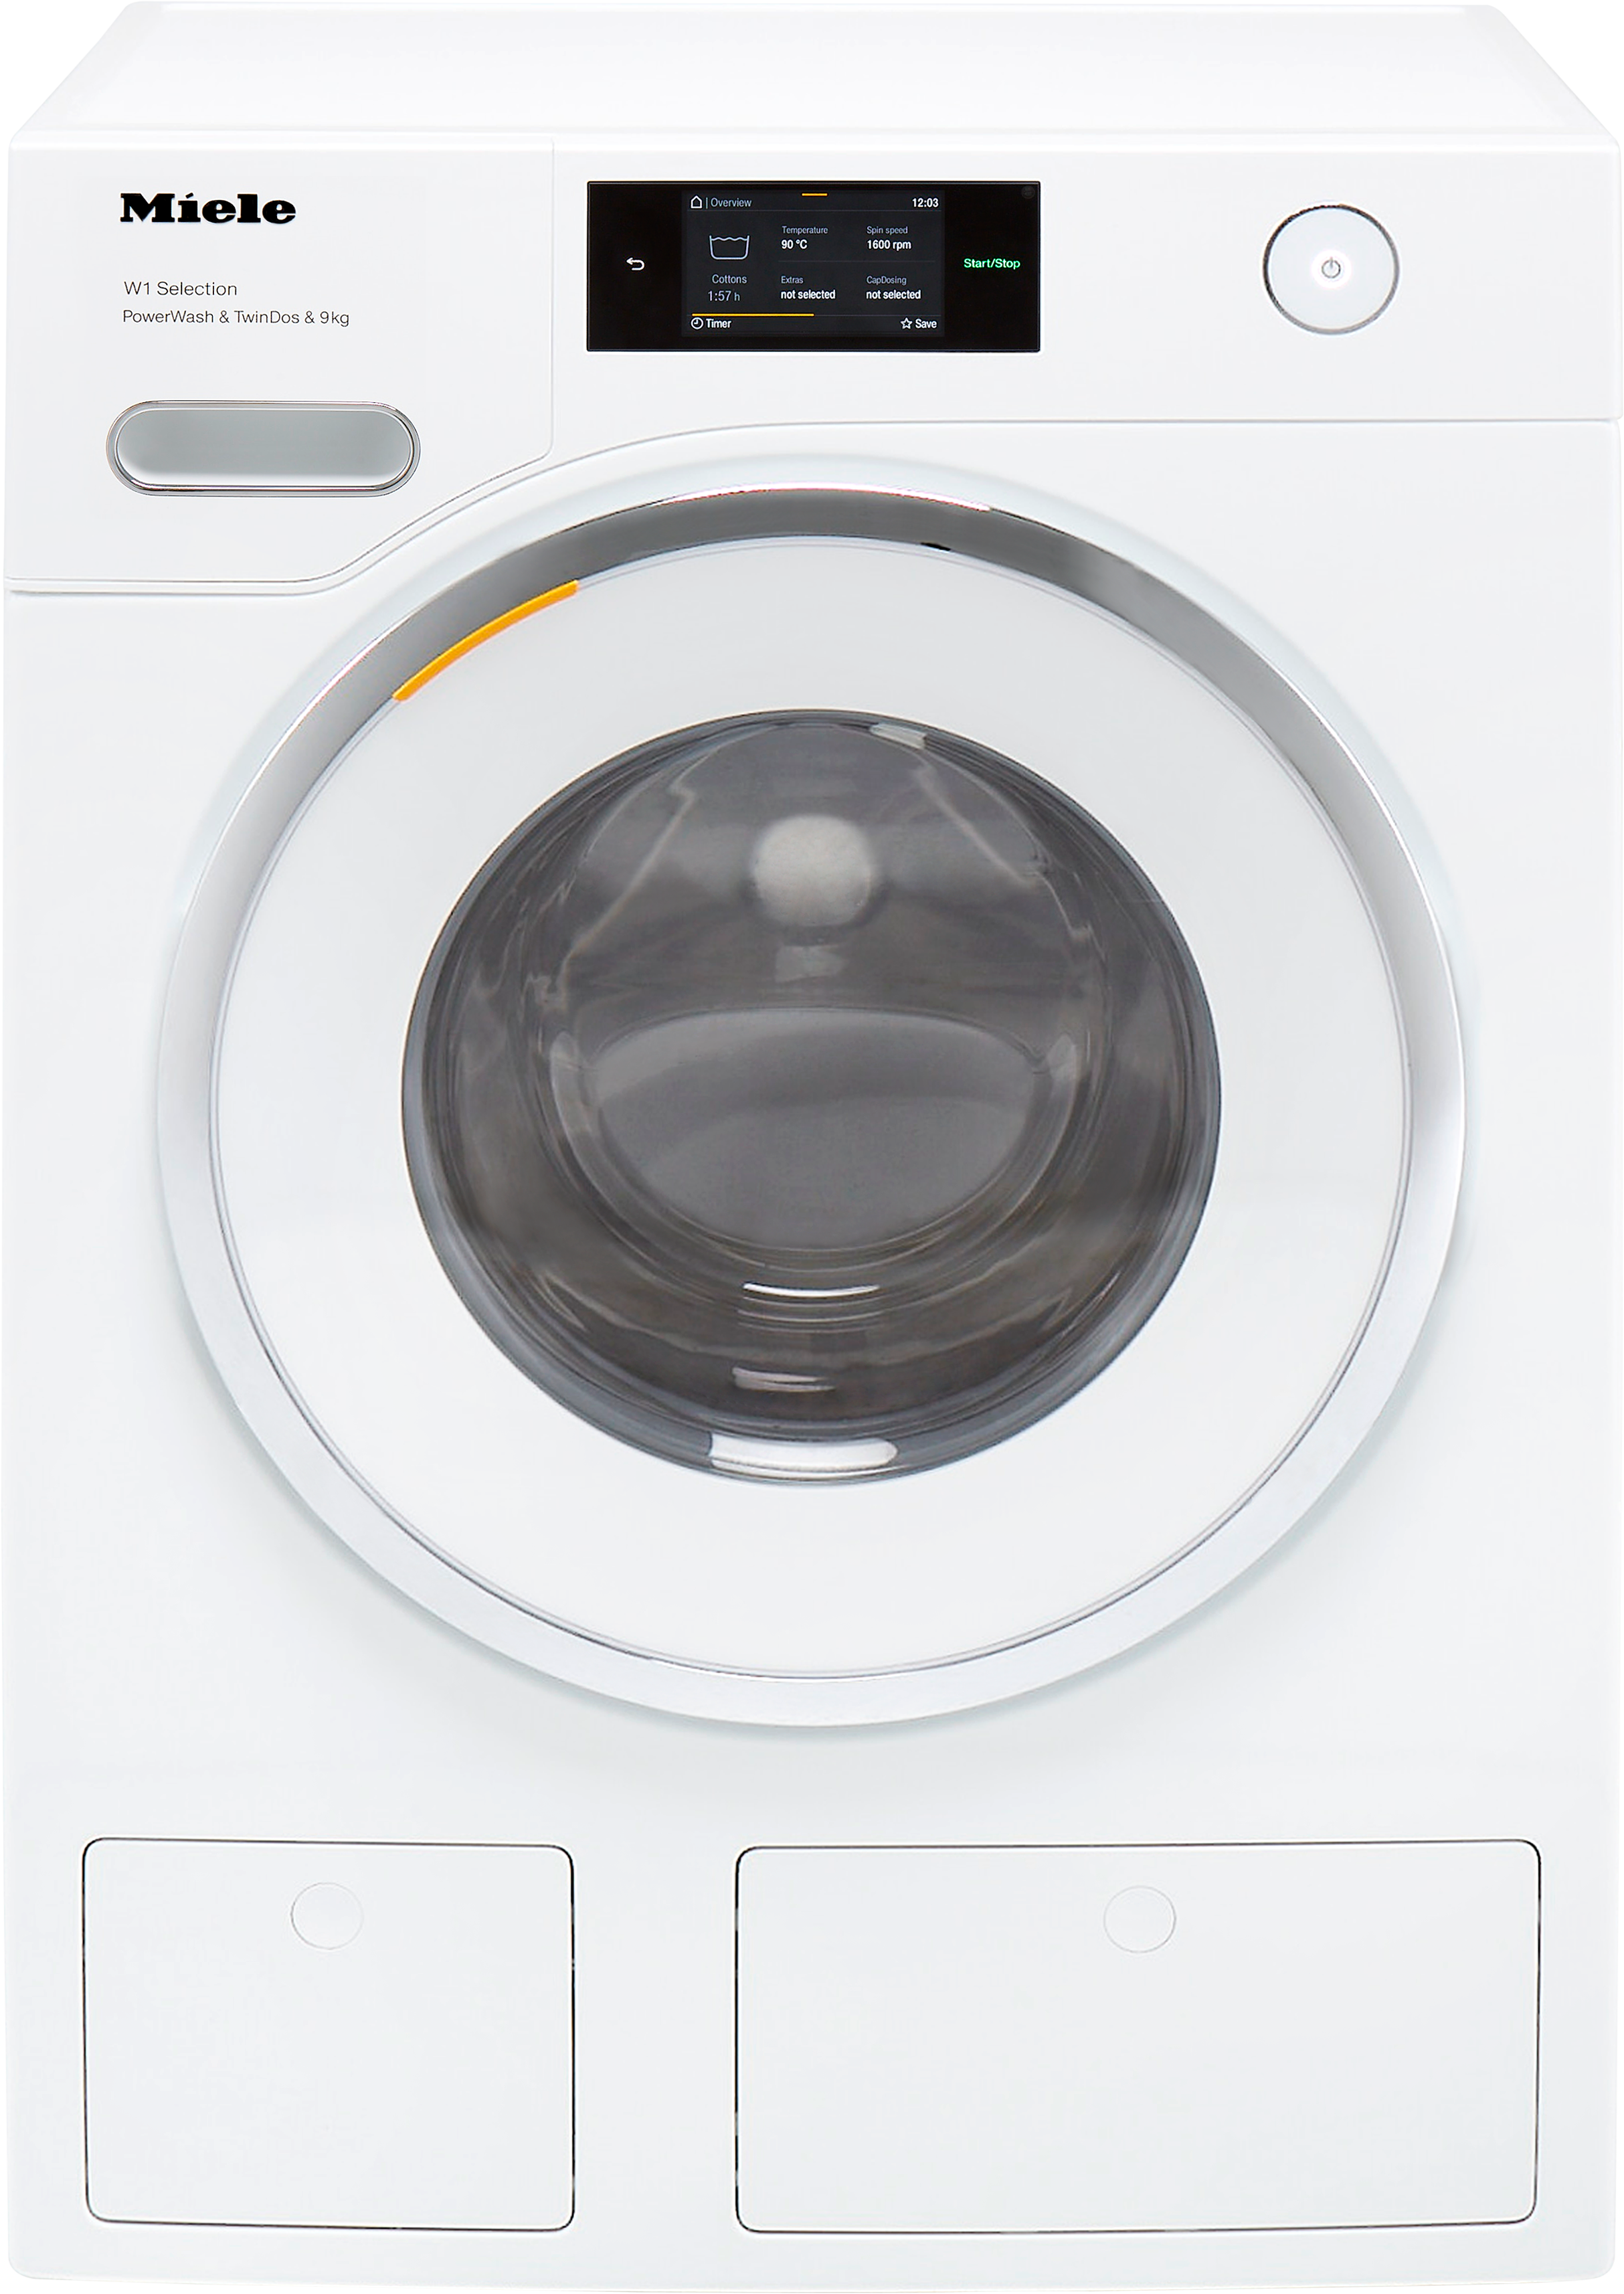 Miele W1 WSR863WPS 9kg Washing Machine with 1600 rpm - White - A Rated, White